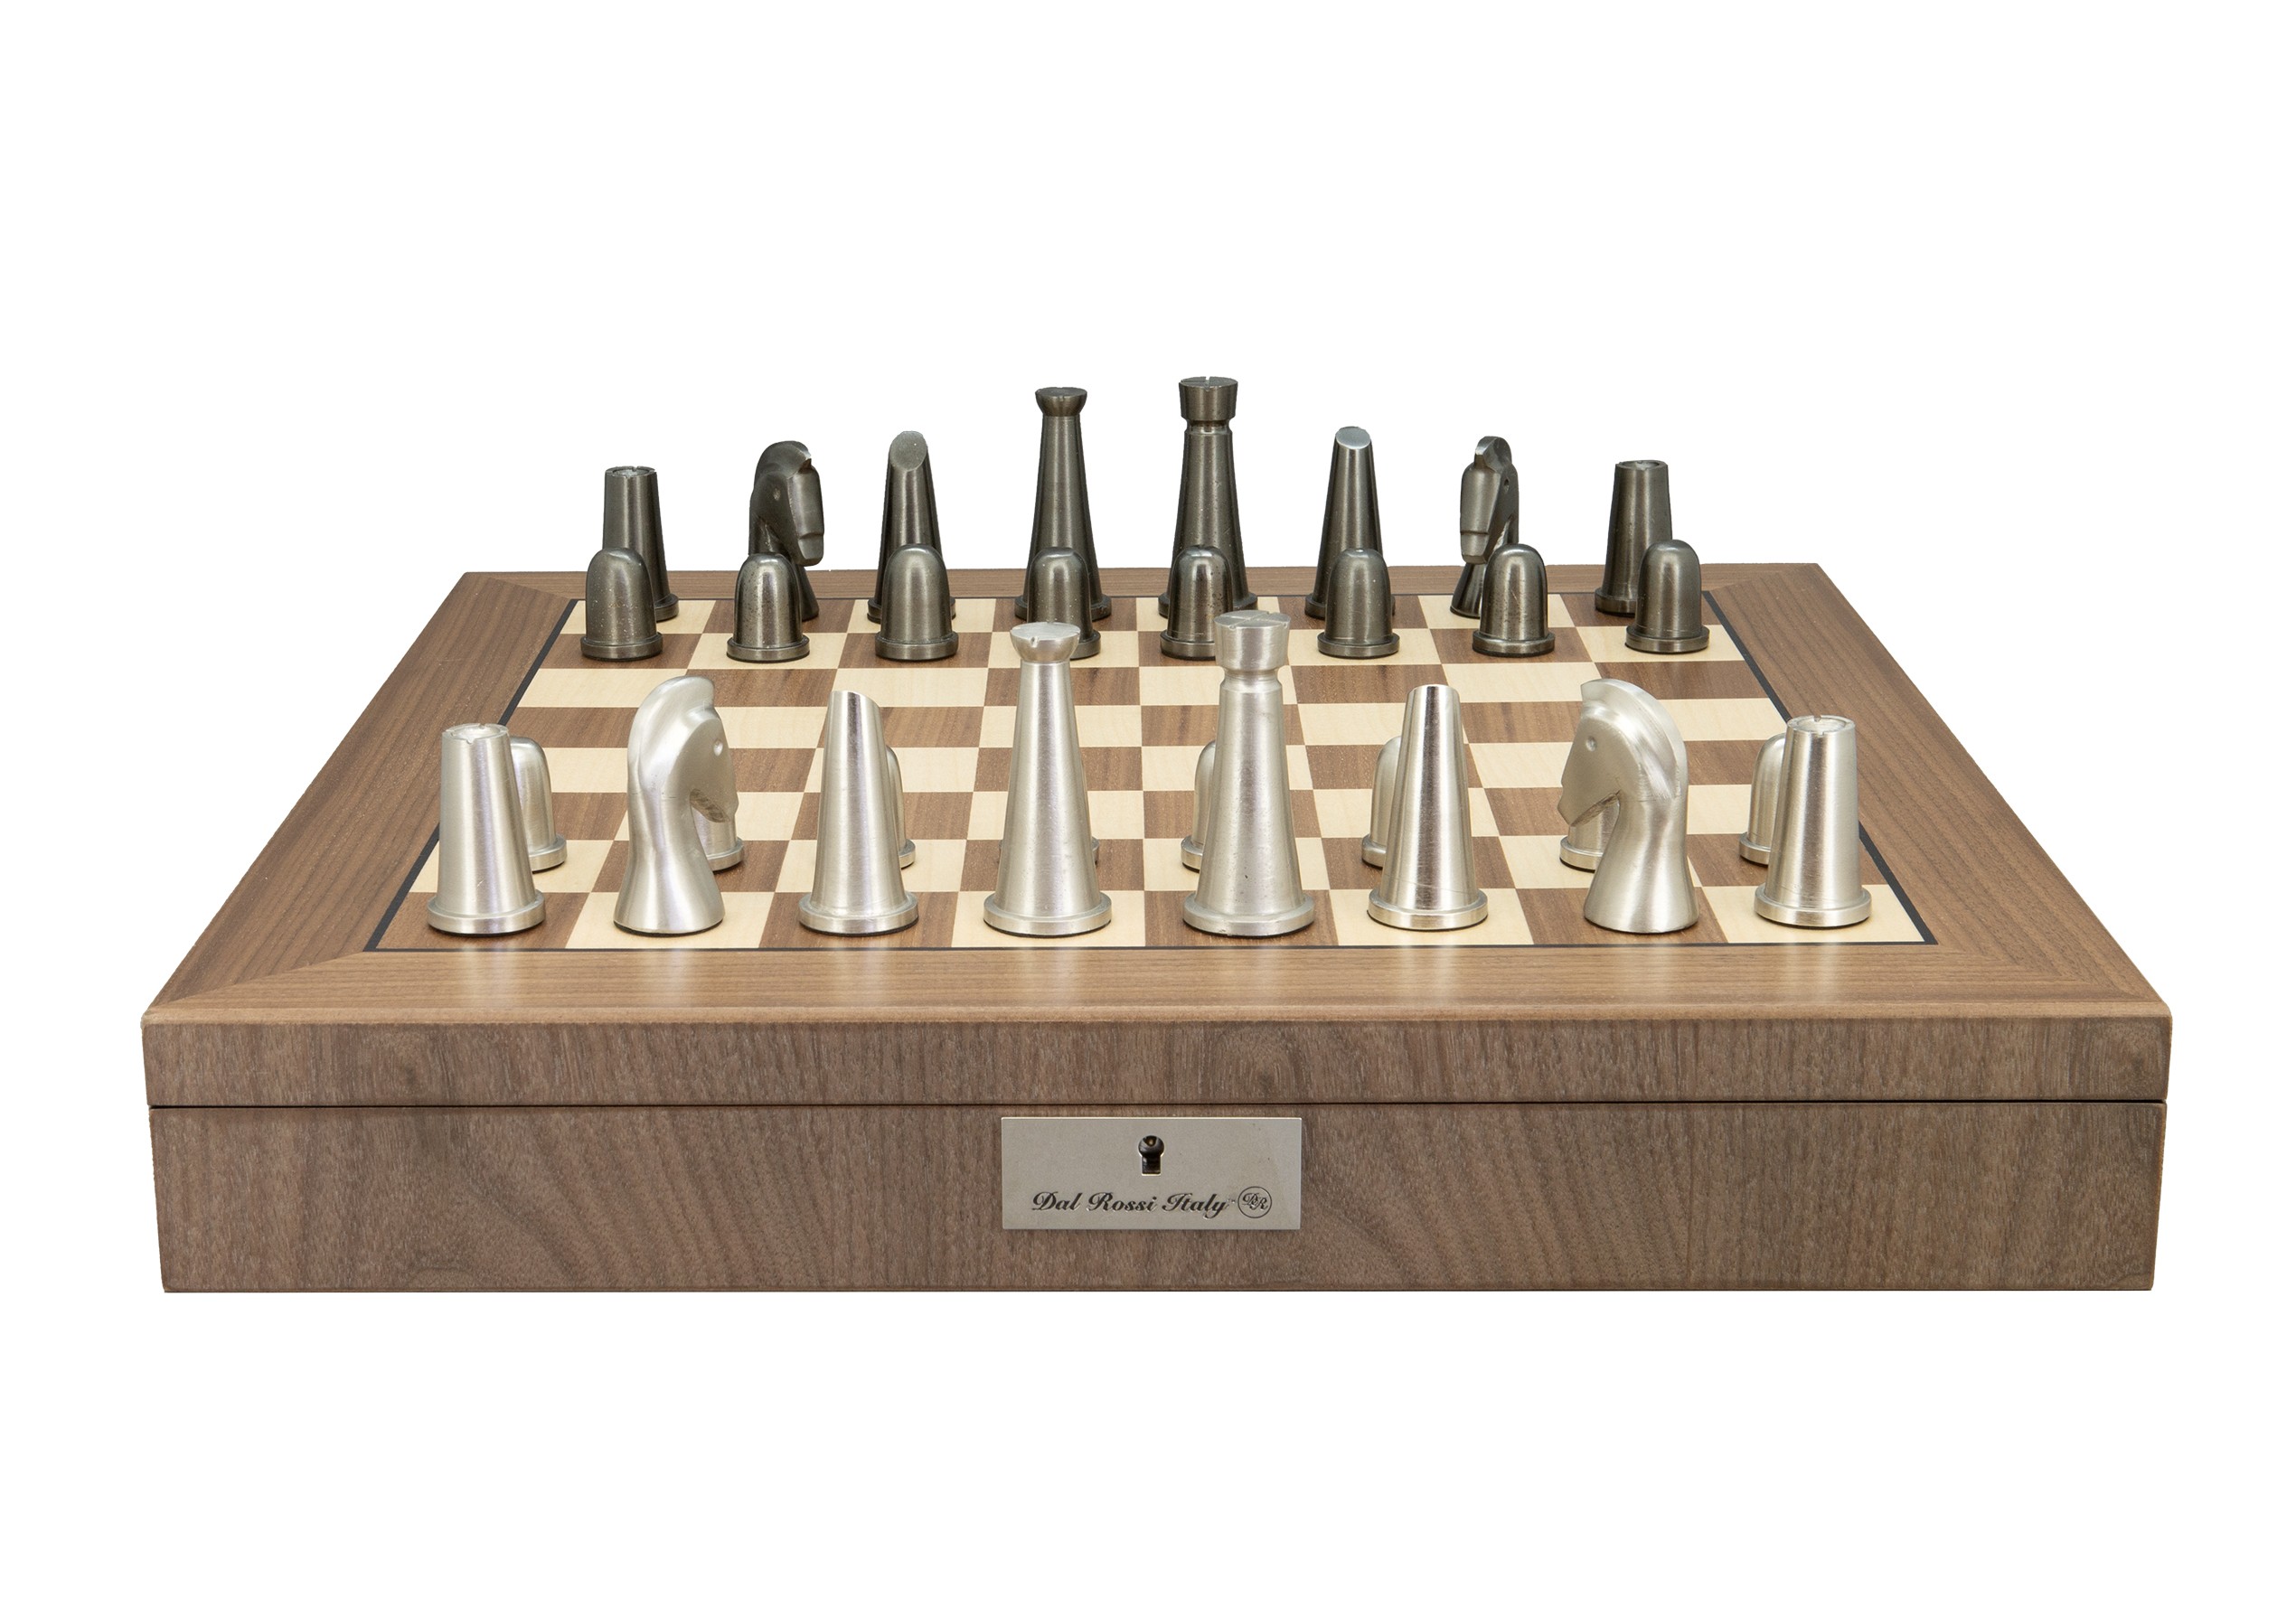 Dal Rossi Italy Metal Dark Titanium and Silver 85mm on a Walnut Inlaid Chess Box with Compartments 20"